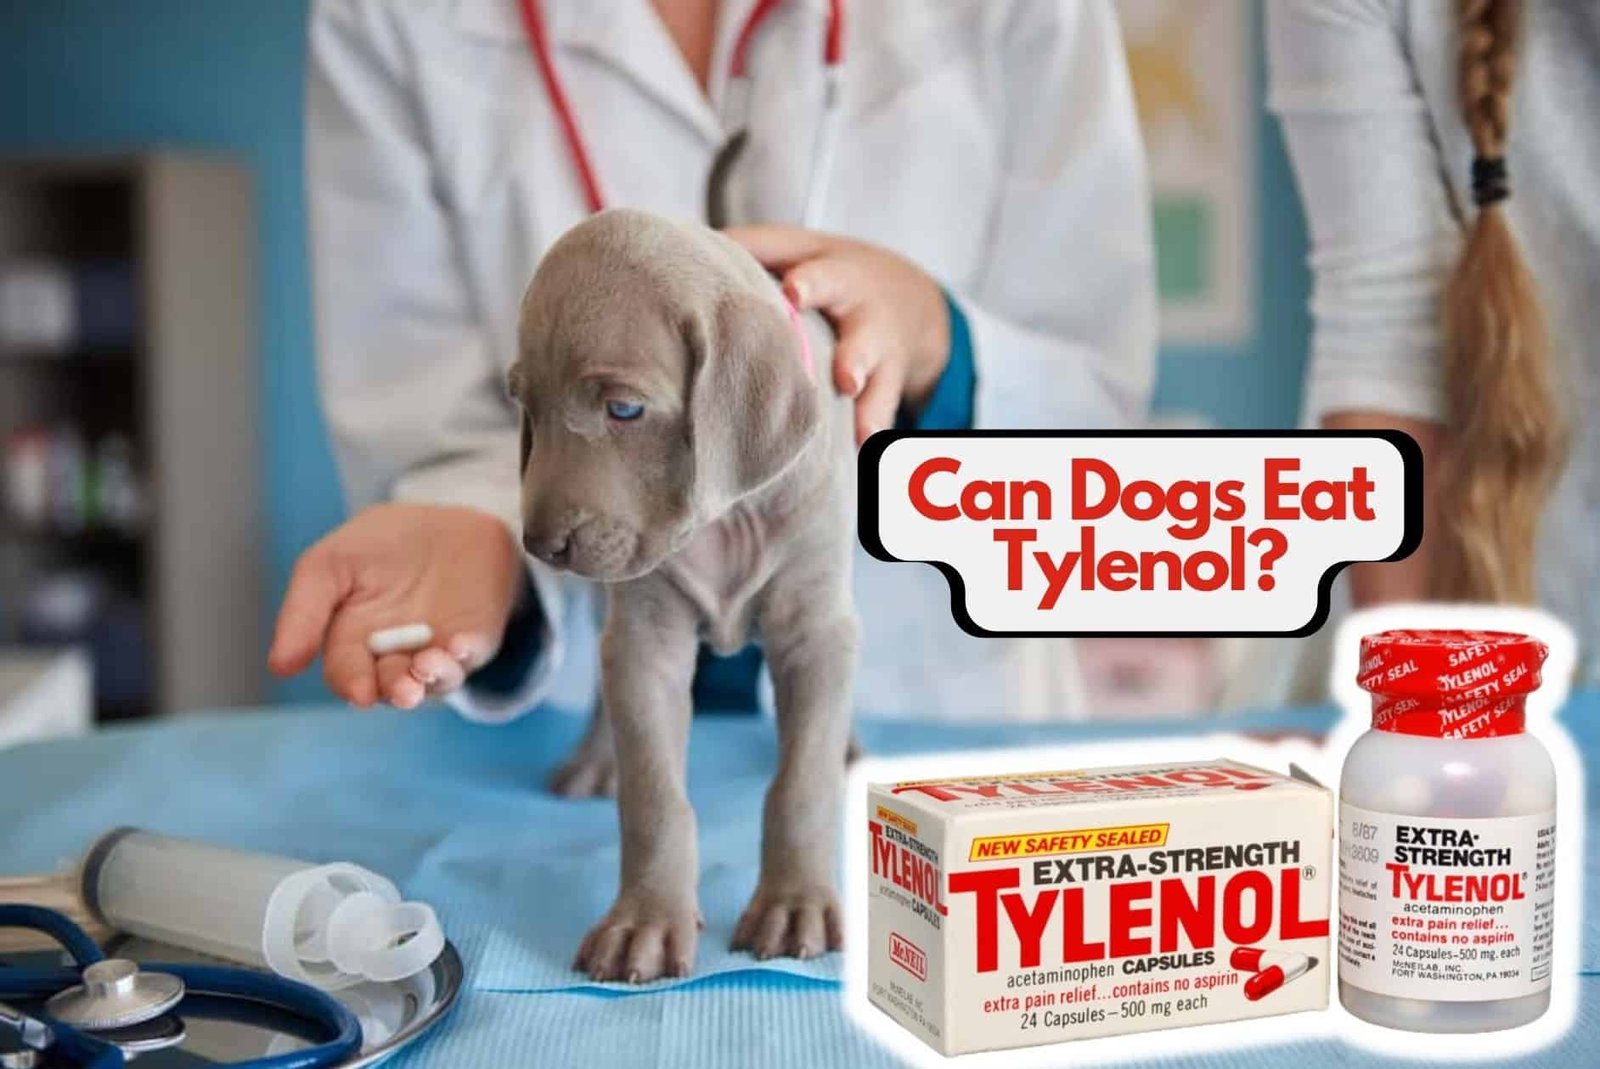 An ill puppy taking pill. Can dogs take tylenol